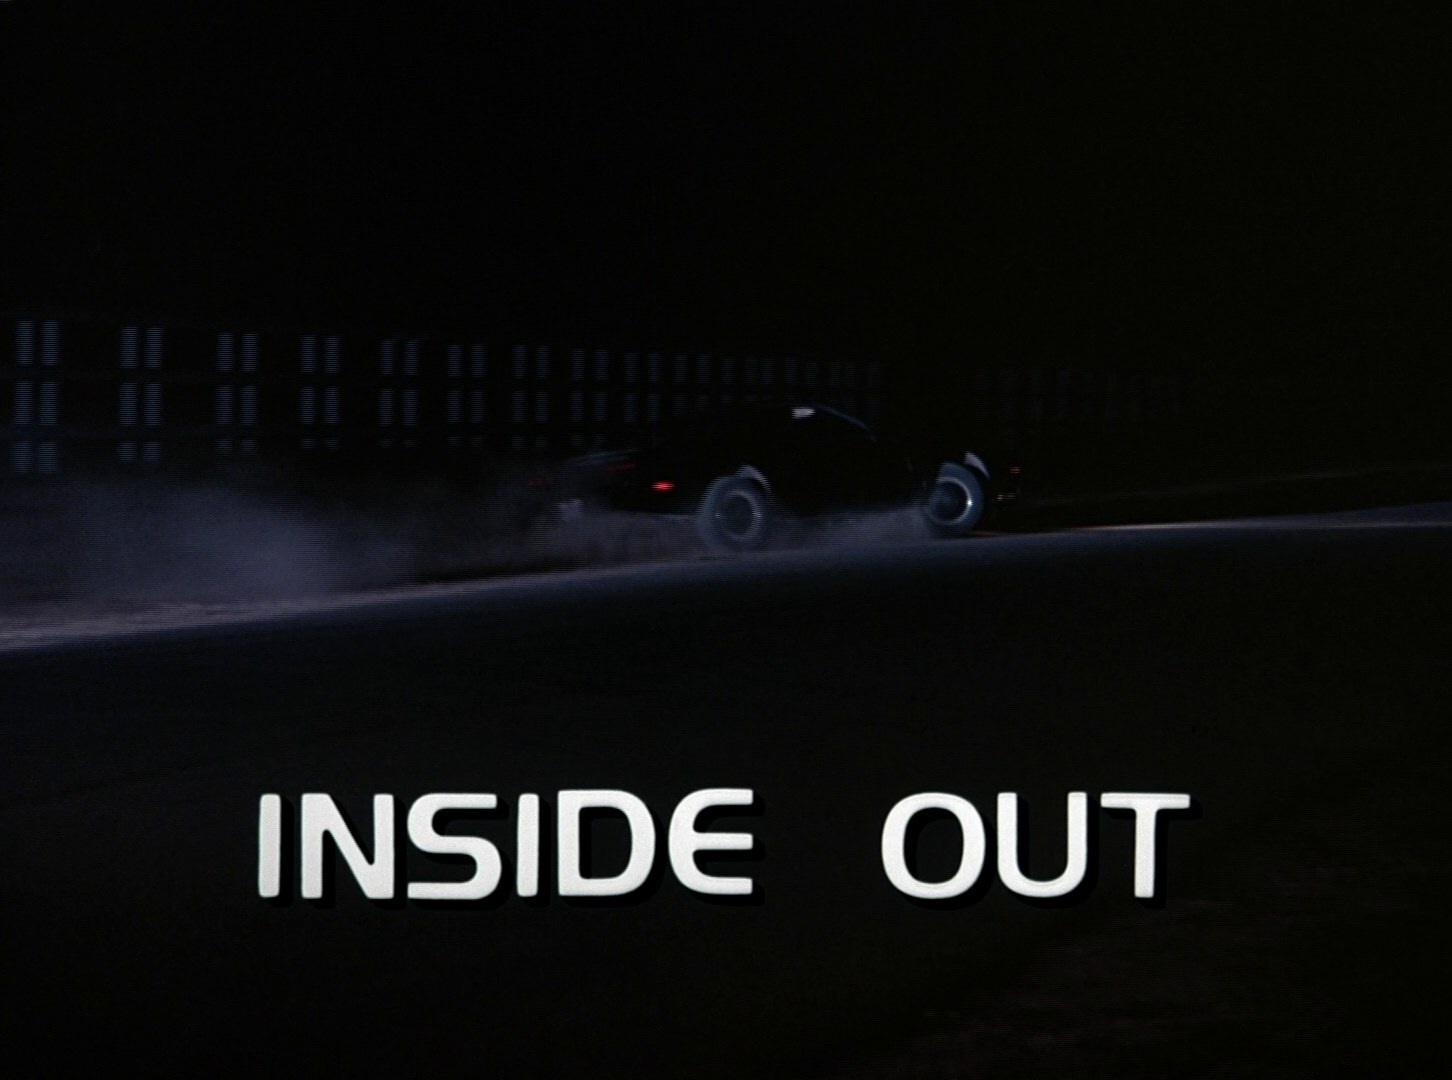 Knight Rider Season 1 - Episode 9 - Inside Out - Photo 17